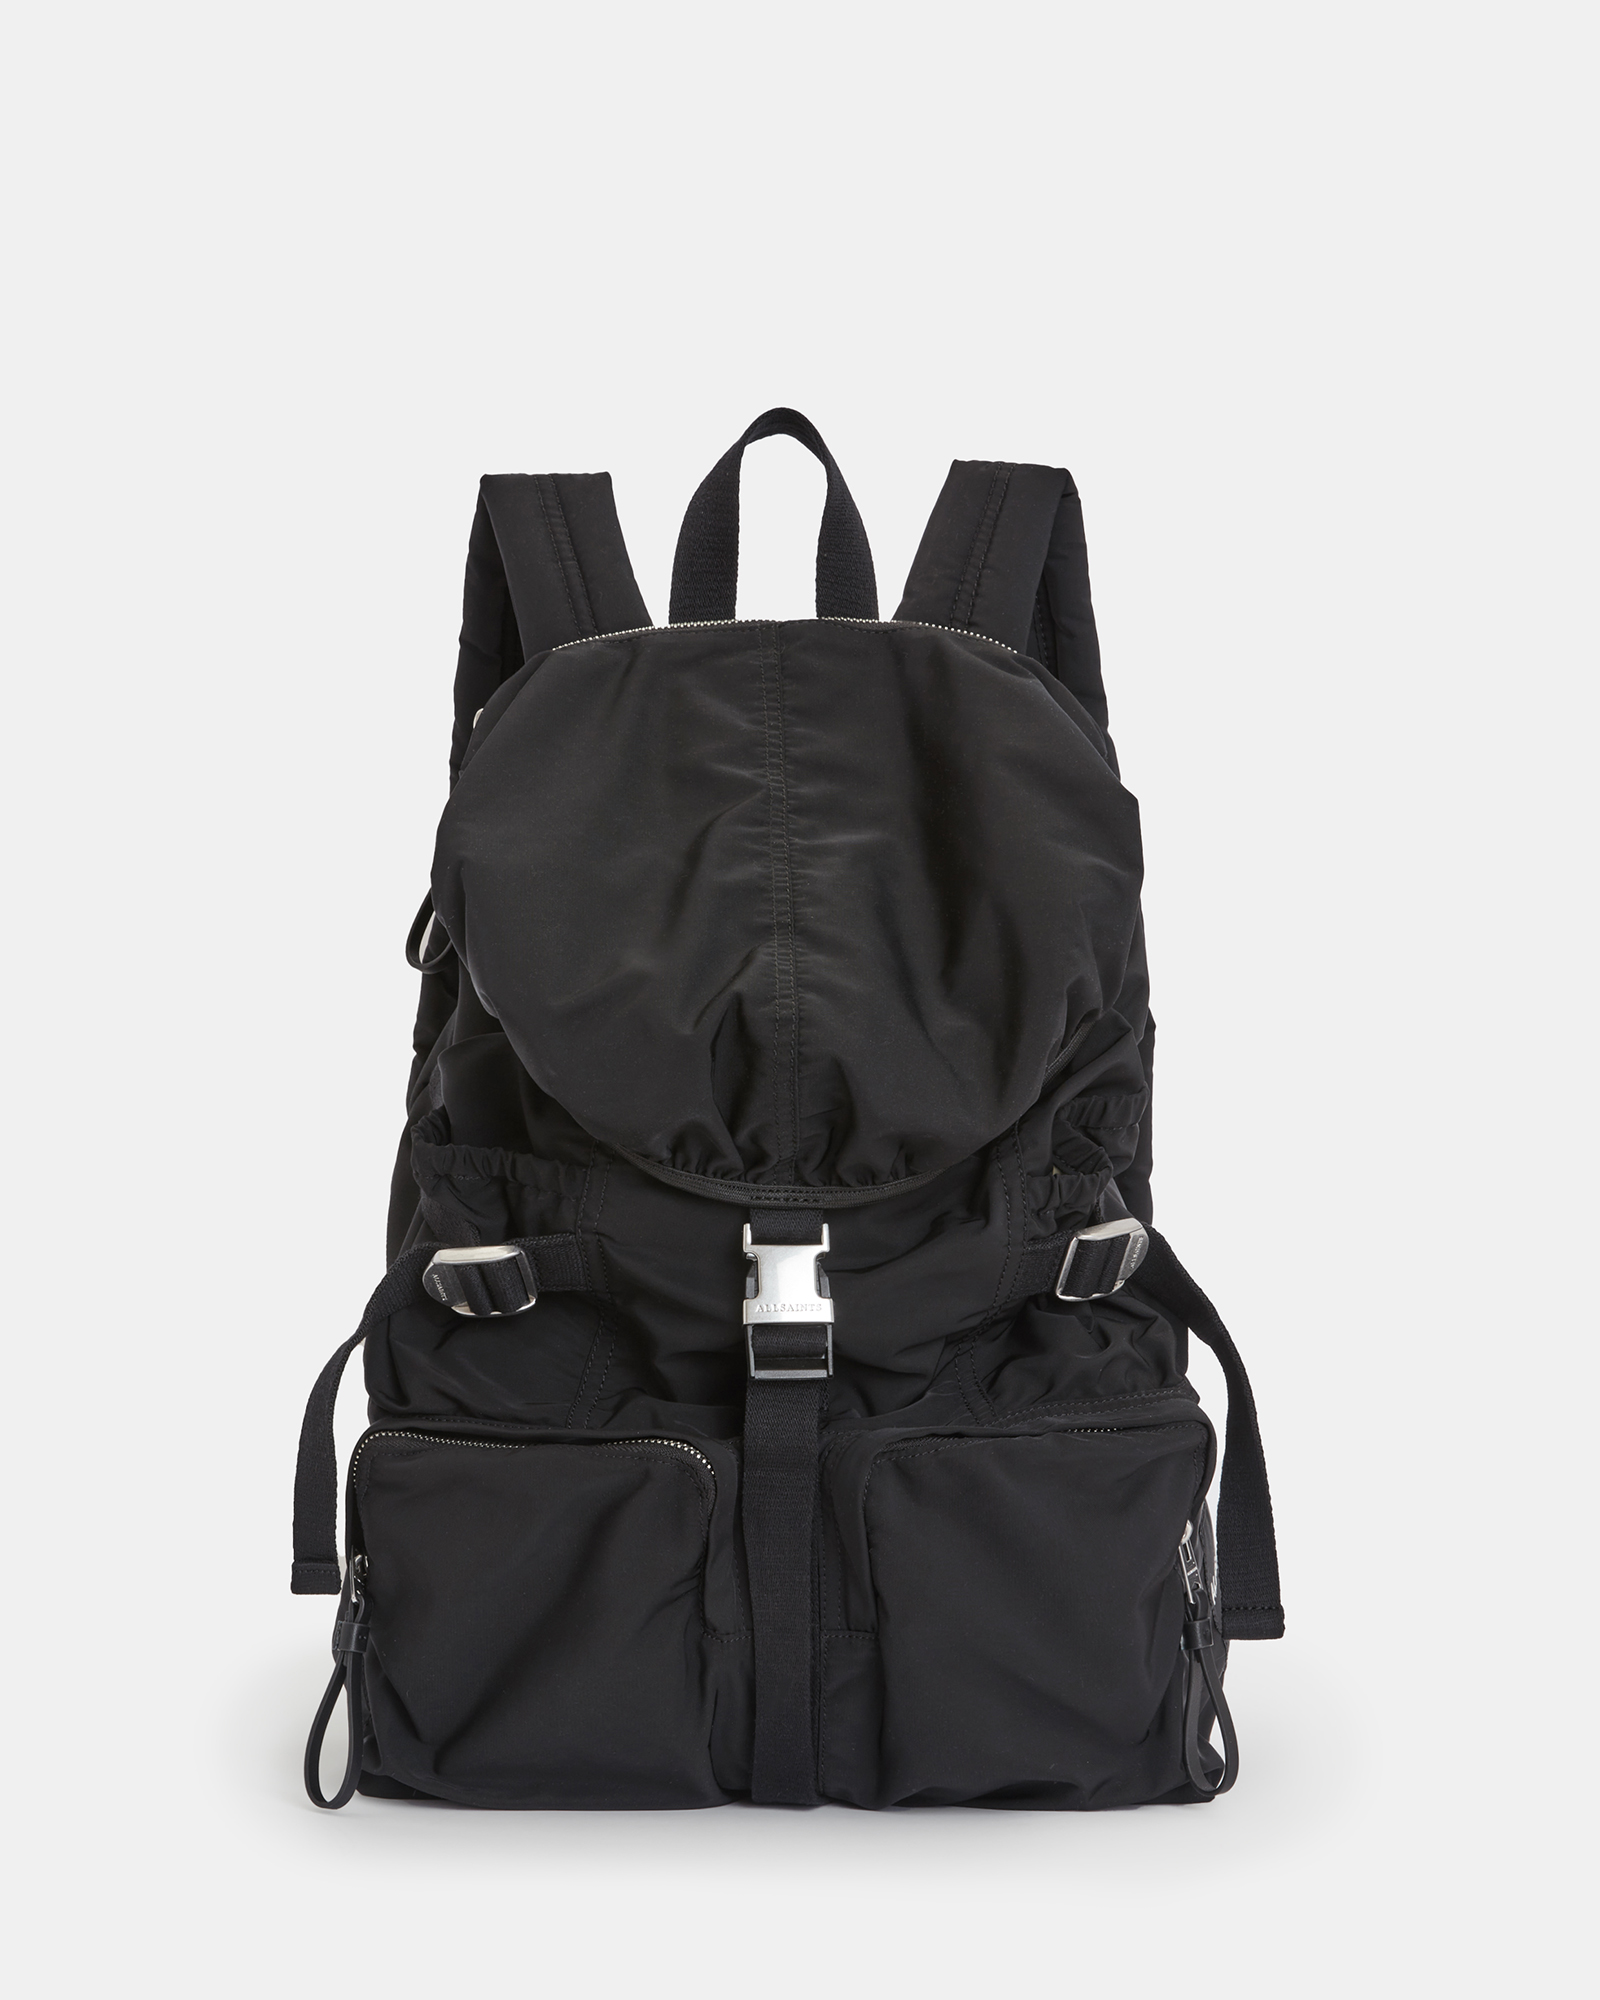 AllSaints Ren Recycled Backpack,, Black, Size: One Size